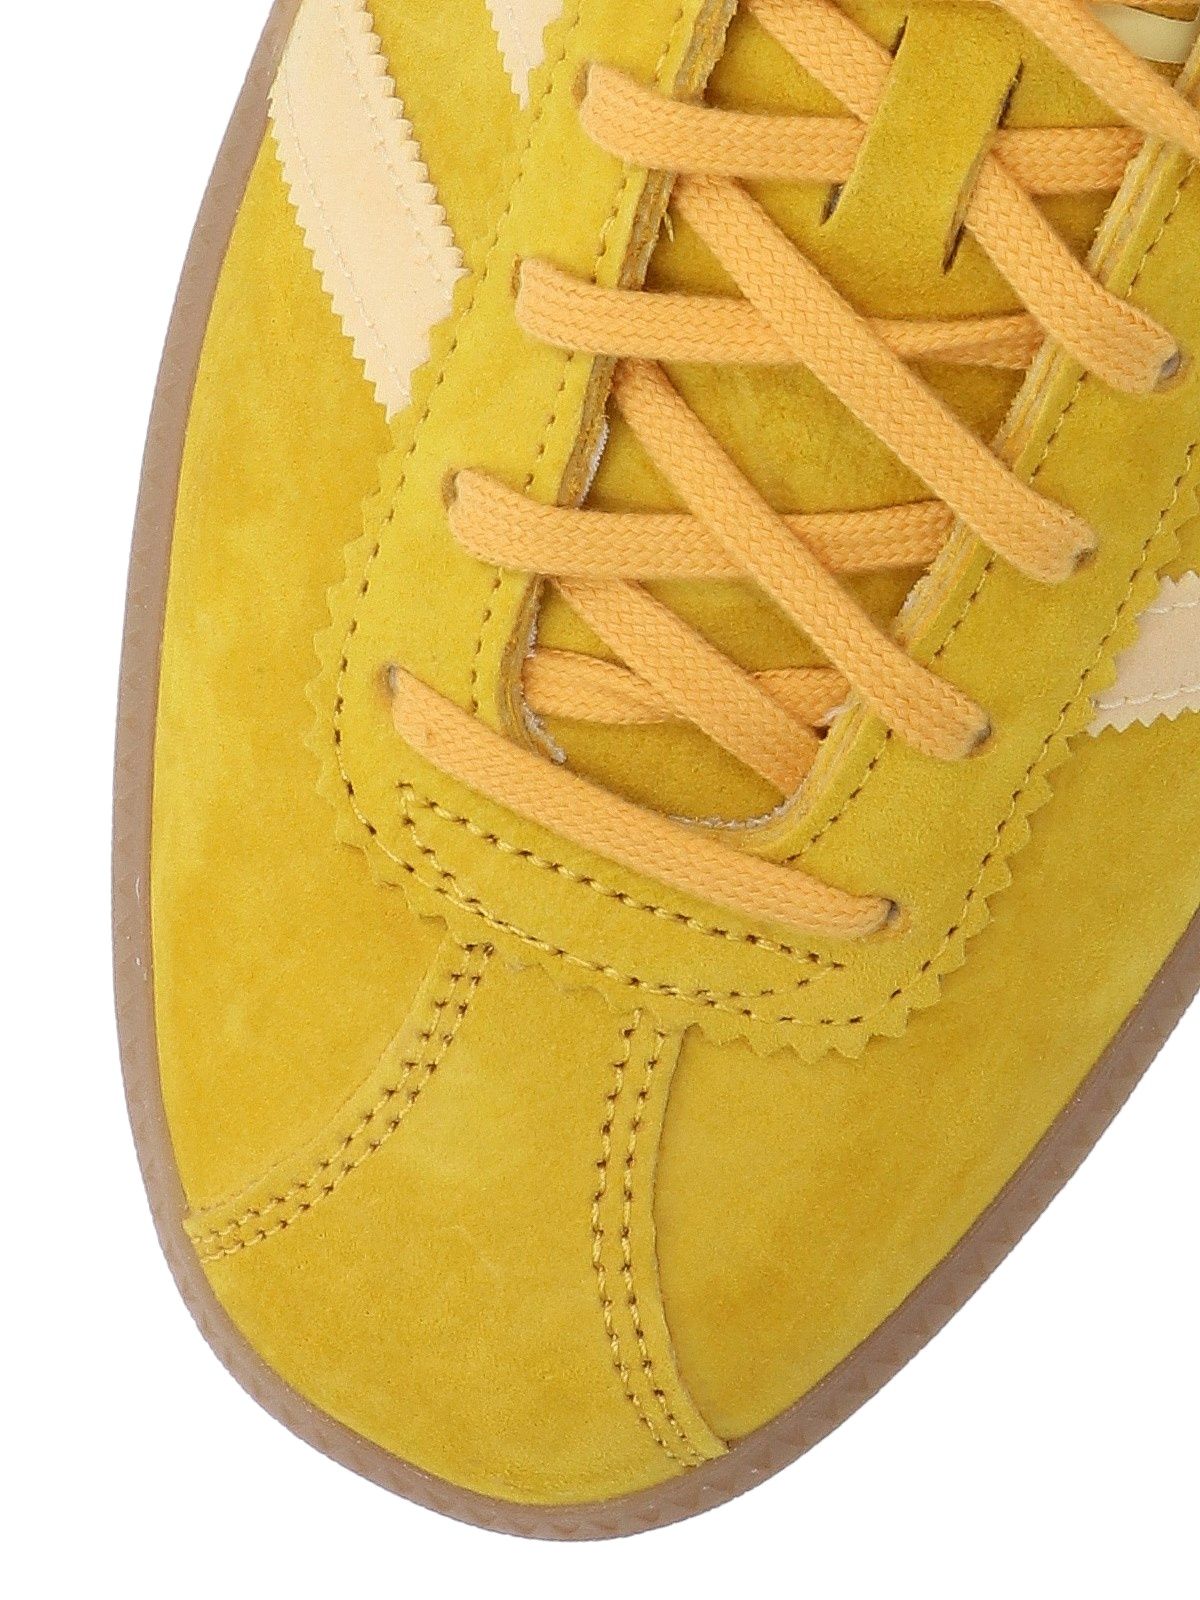 Sneakers "Bermuda Trainers Bold Gold"